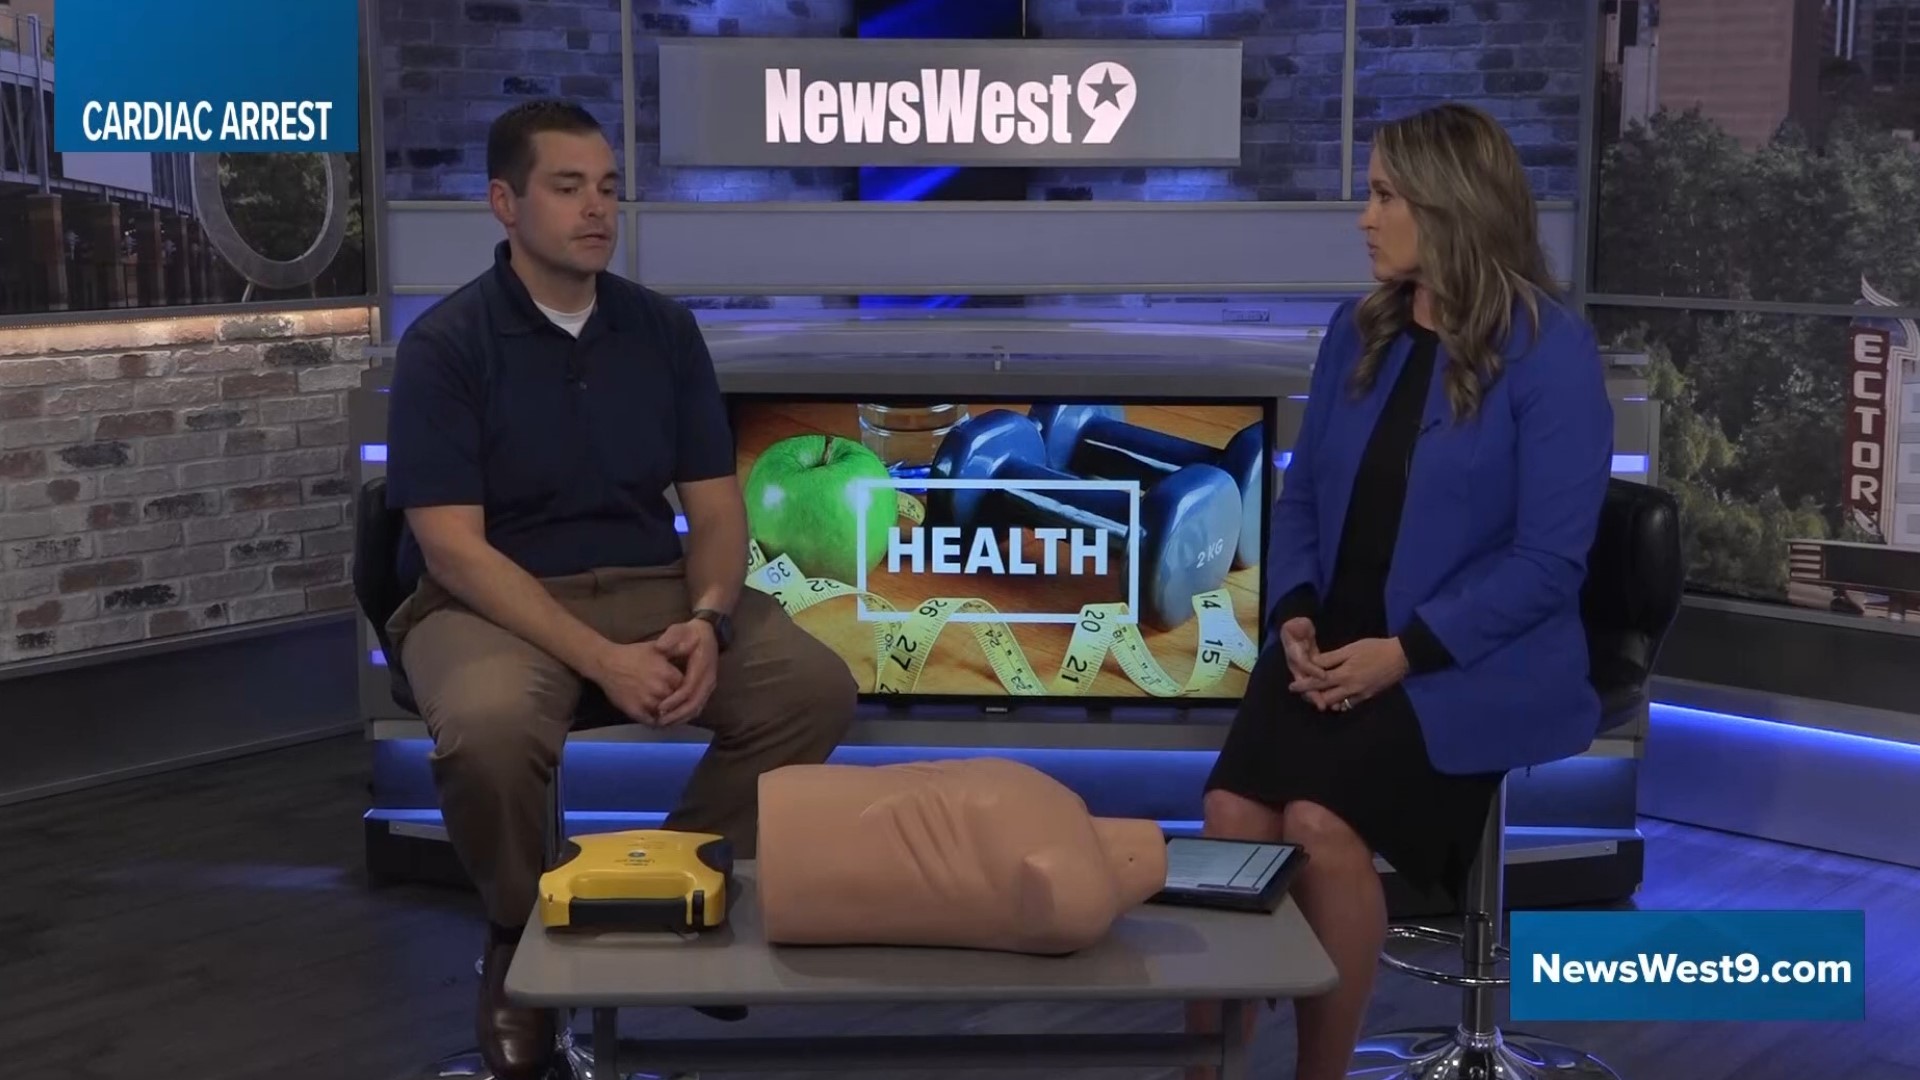 Midland Memorial Hospital's Chief Nursing Officer Kit Bredimus explains how cardiac arrest happens and what you can do to safe the life of someone experiencing it.